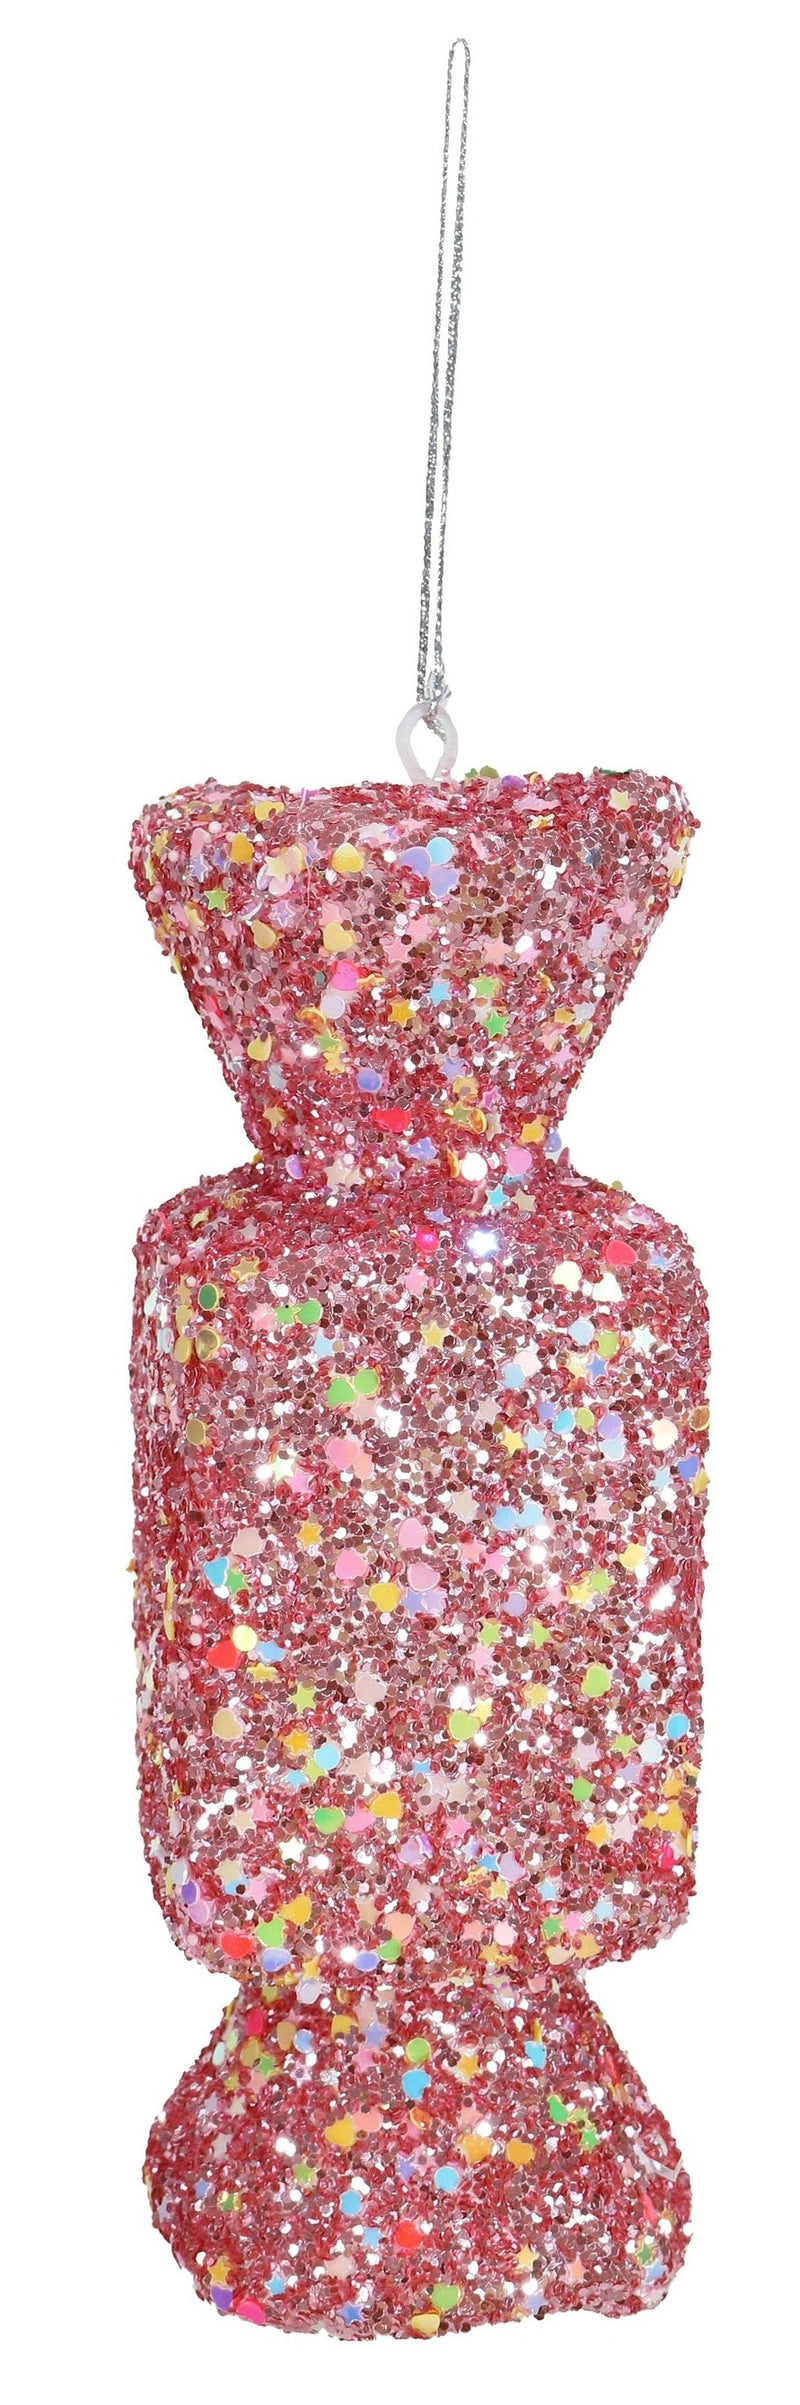 COMING SOON - HANGING SPRINKLES CANDY PINK